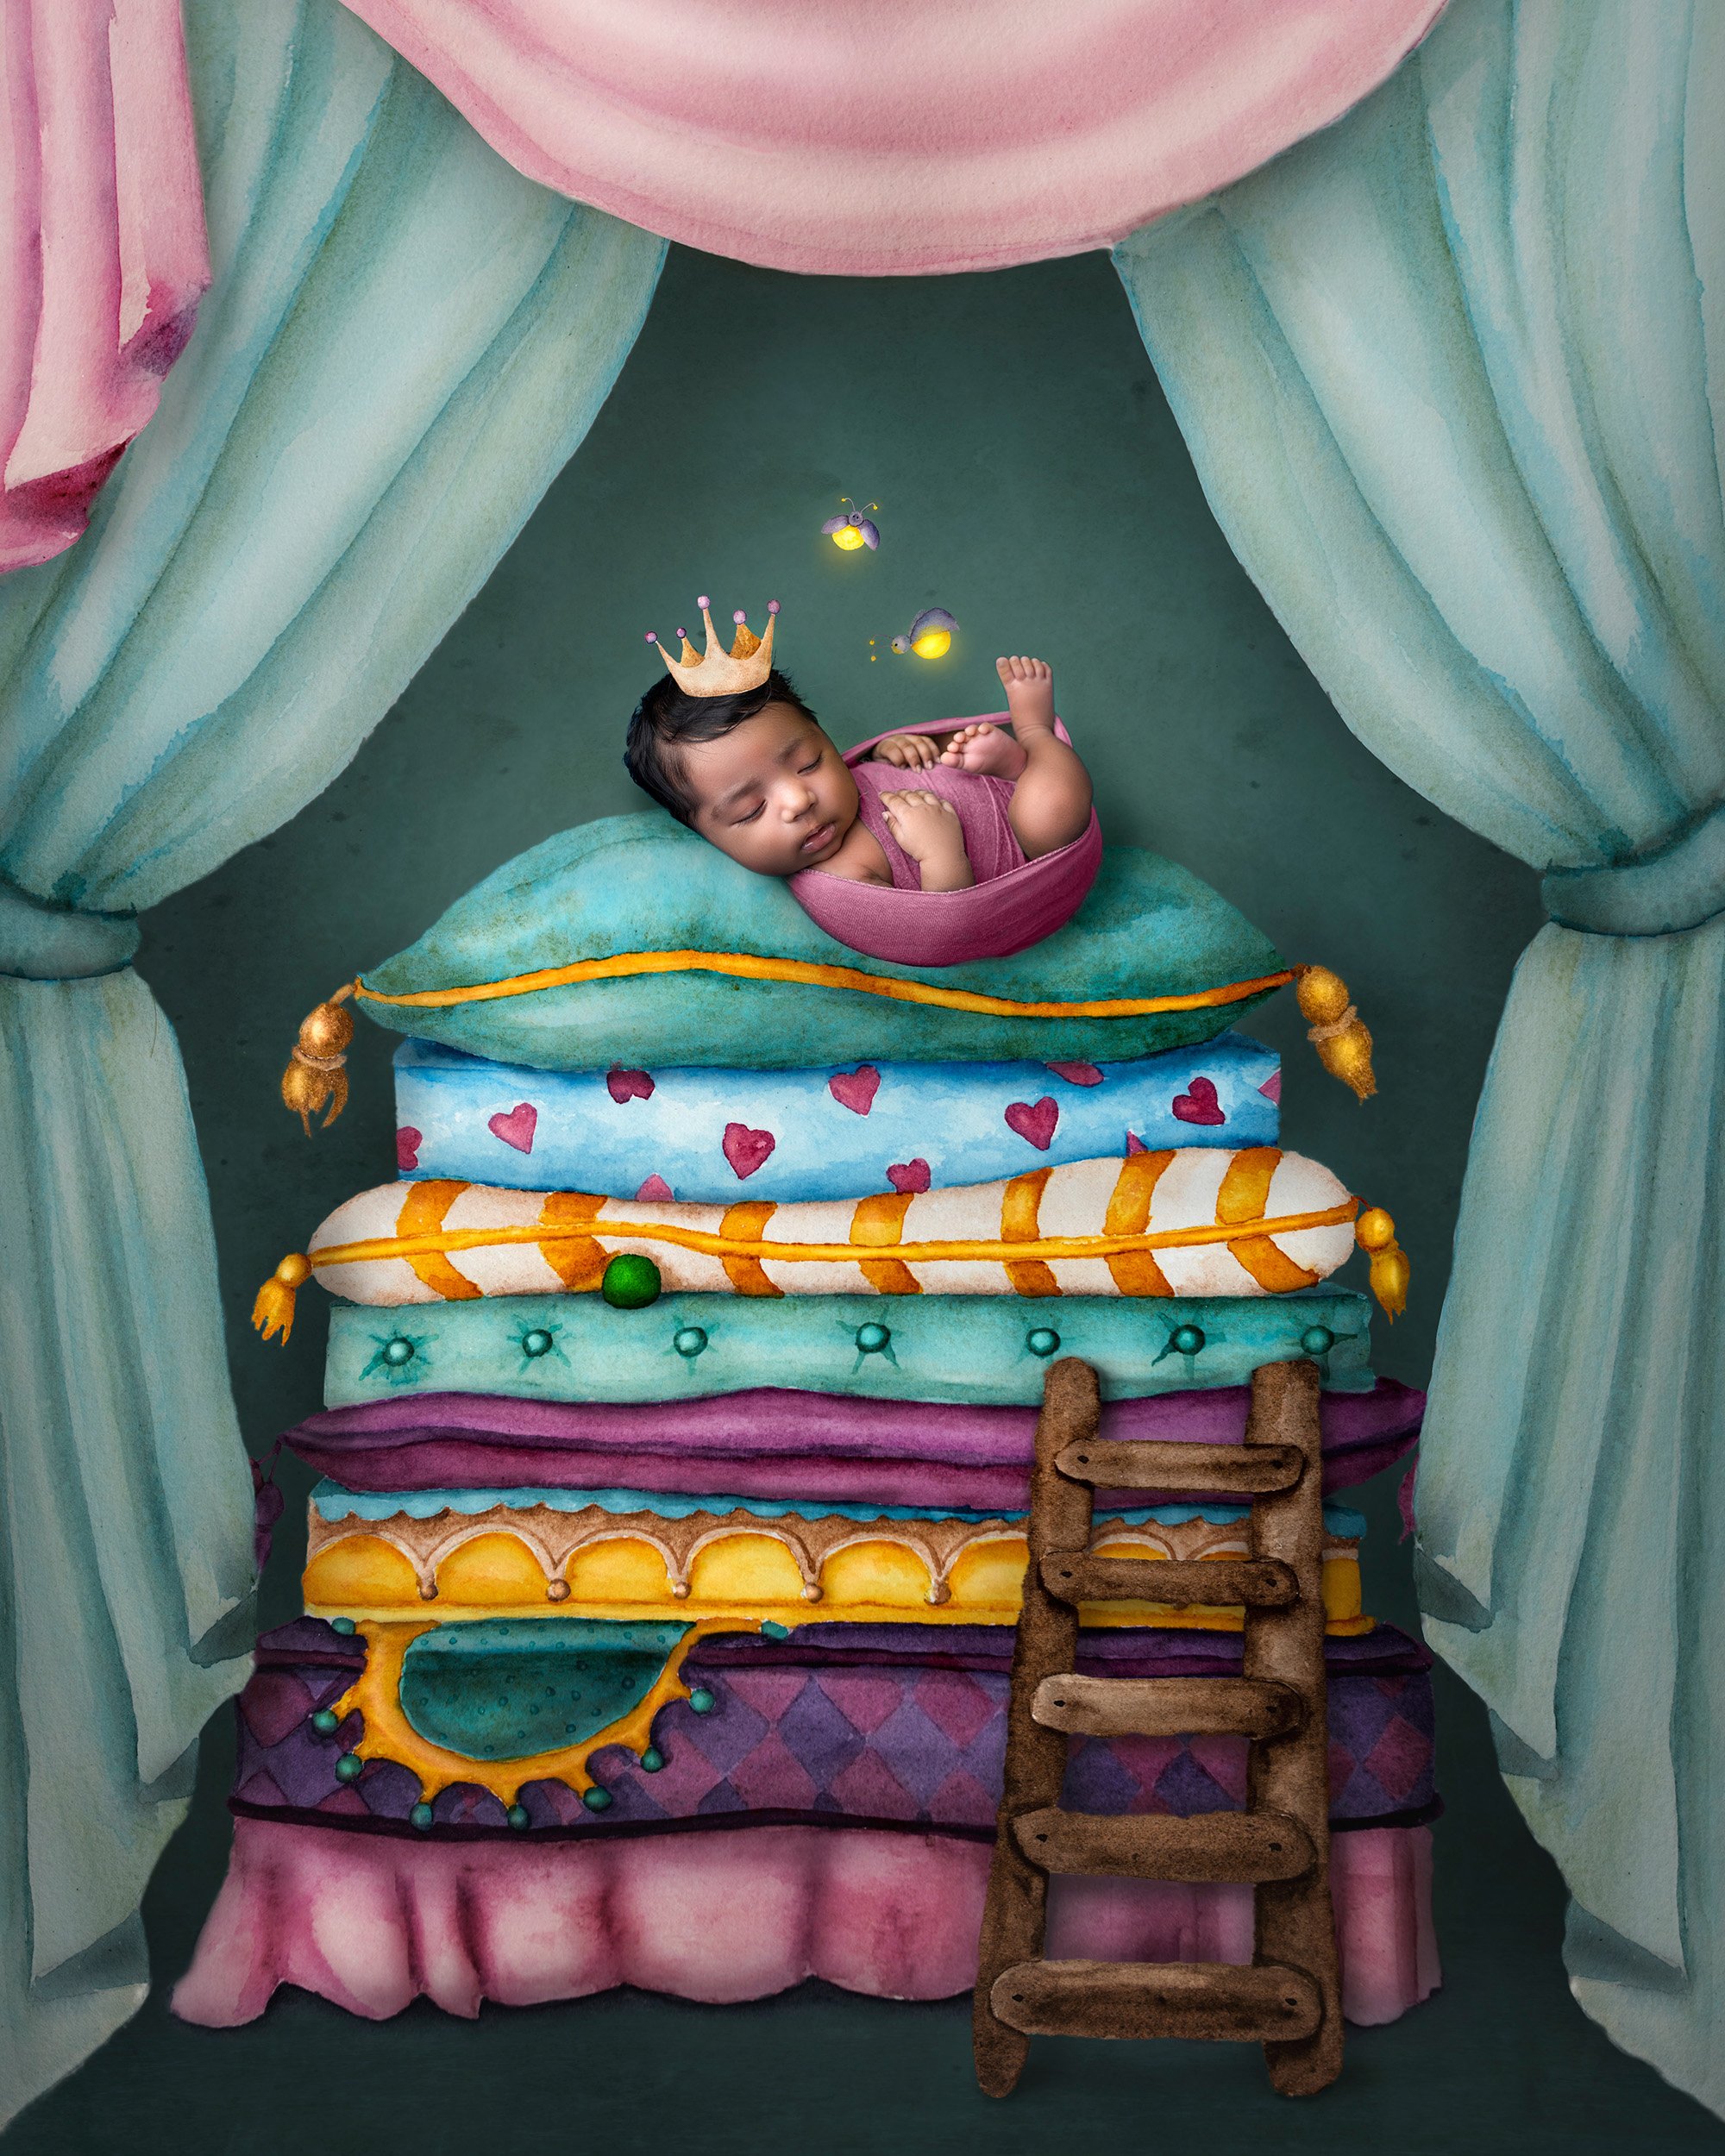 Newborn Girl Photography newborn baby girl wearing a crown happily asleep on a stack of fairytale beds